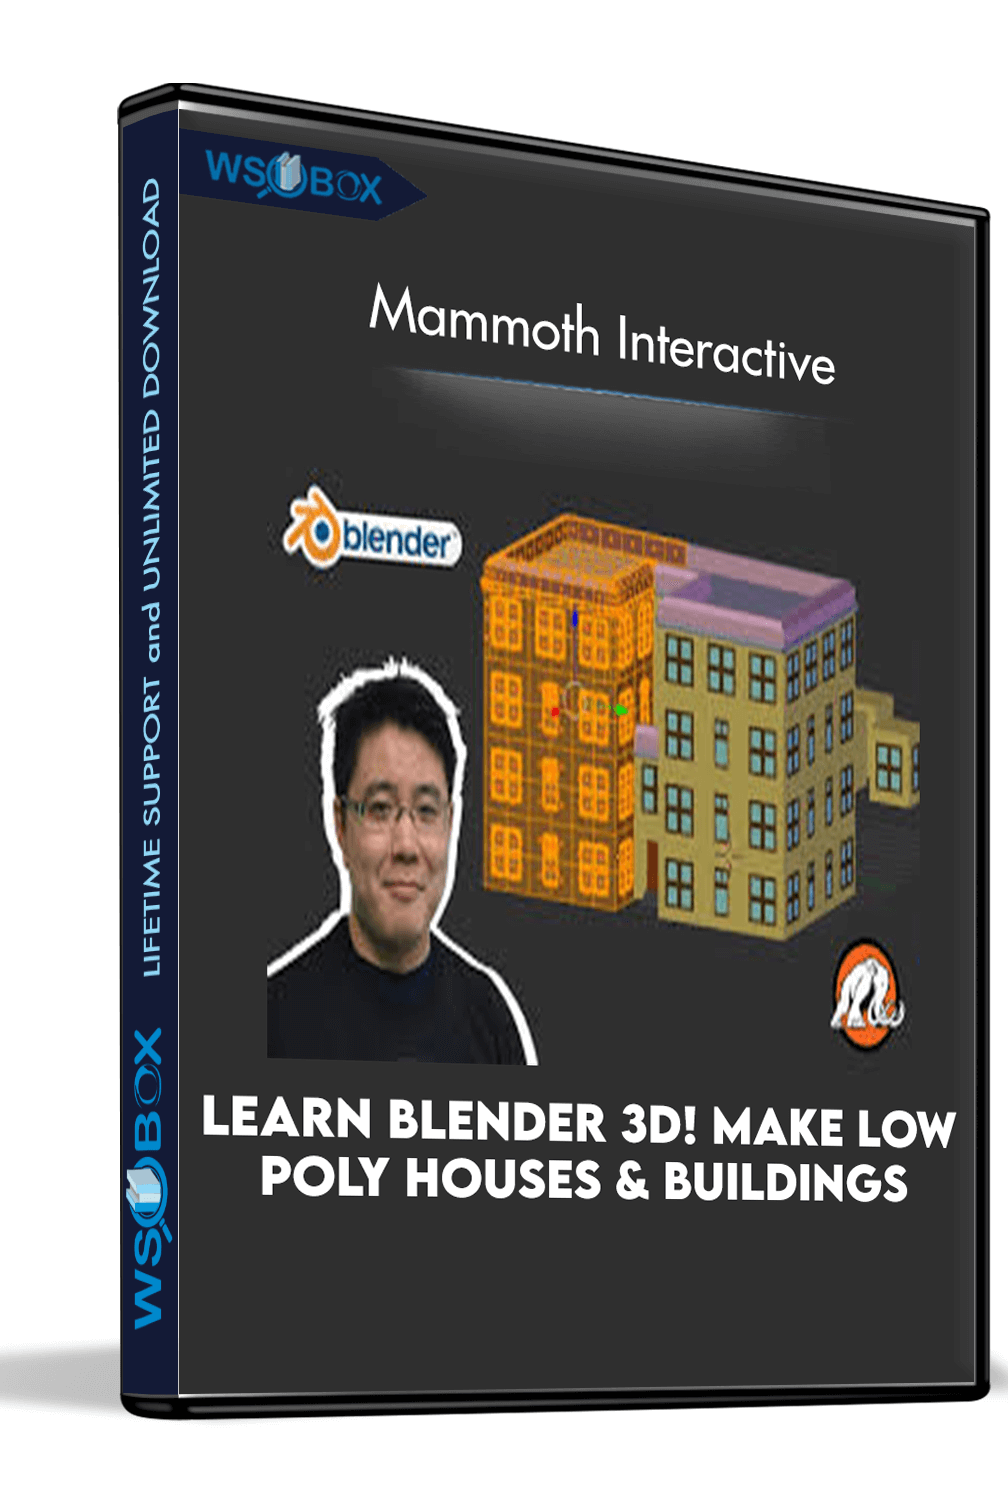 learn-blender-3d-make-low-poly-houses-buildings-mammoth-interactive